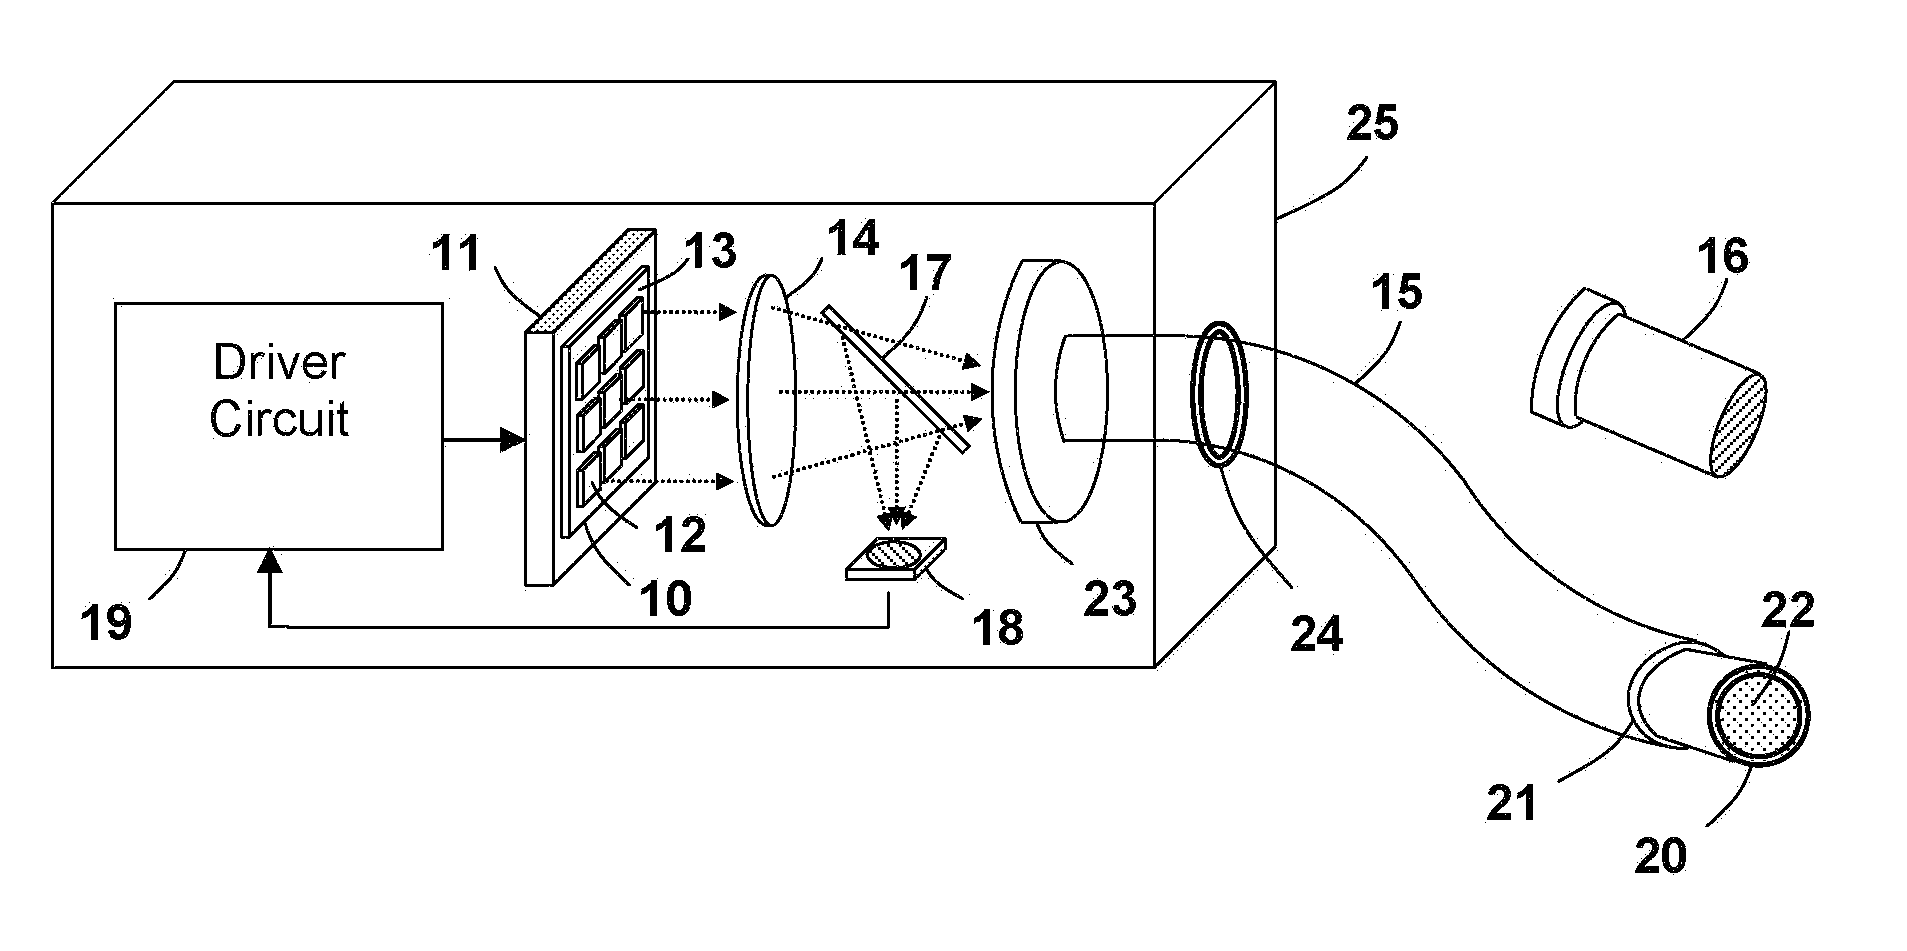 Light Emitting Apparatus for Medical Applications